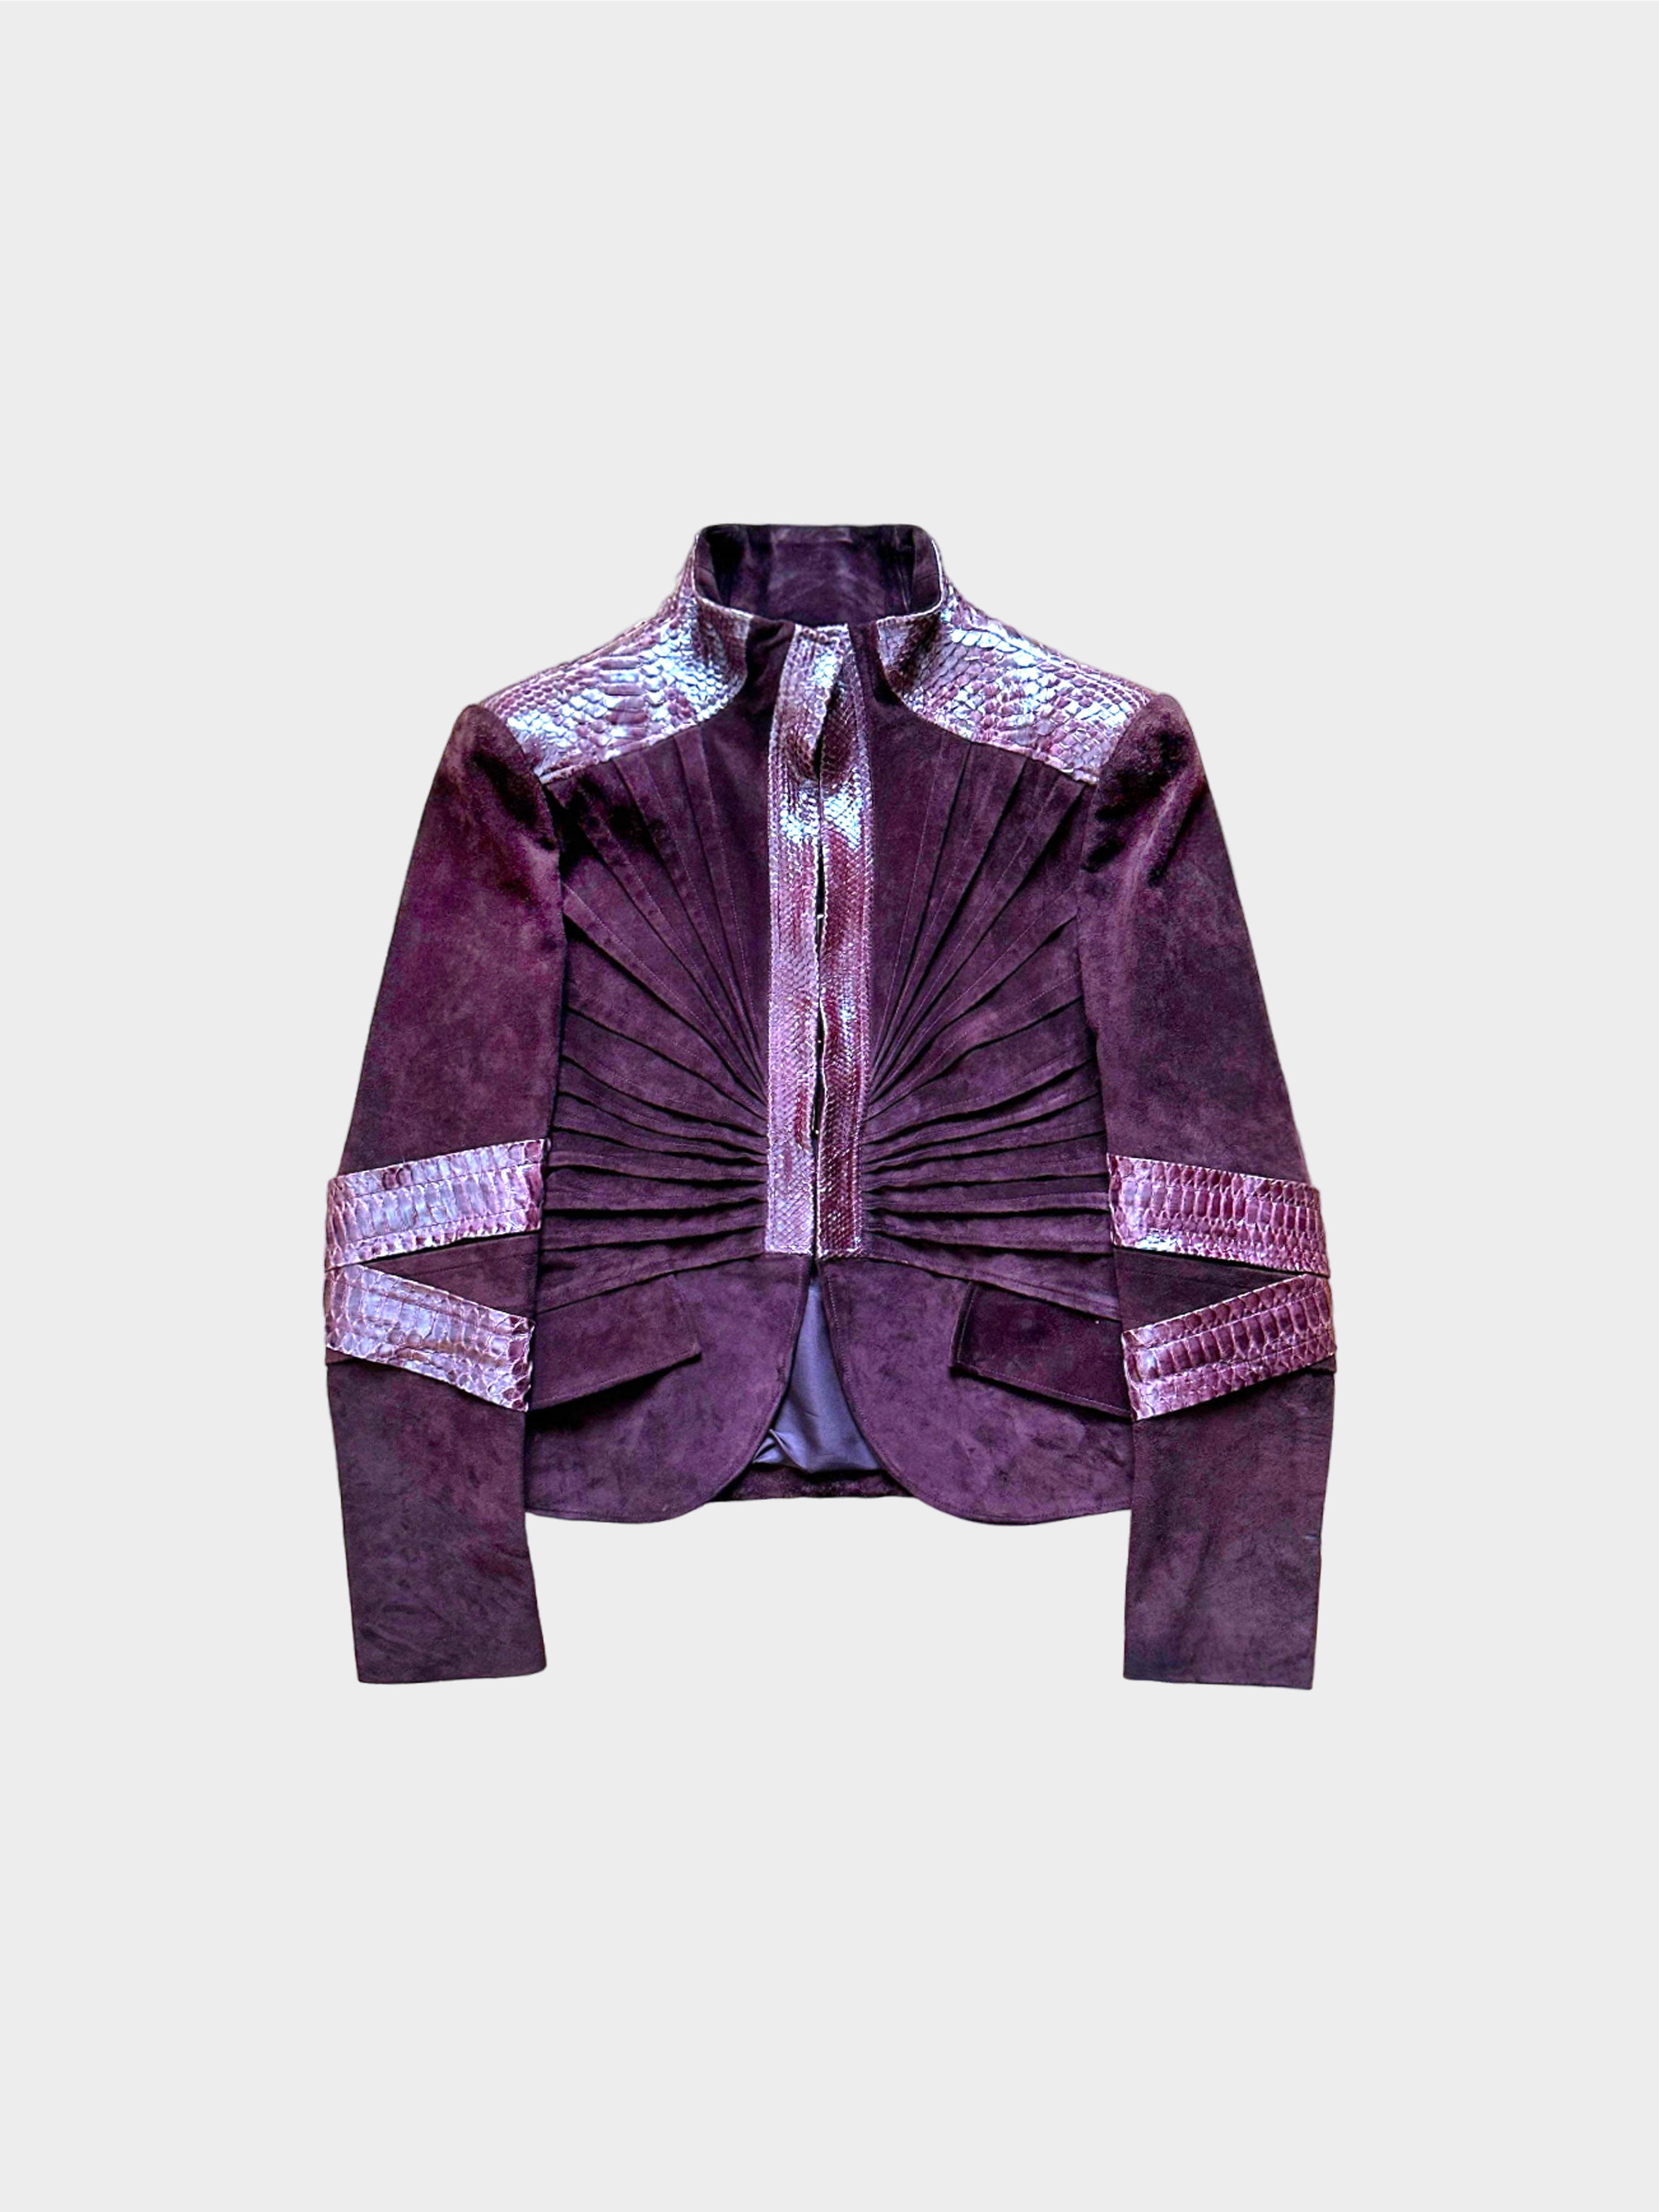 Gucci By Tom Ford  SS 2004 Burgundy Python Suede Paneled Jacket